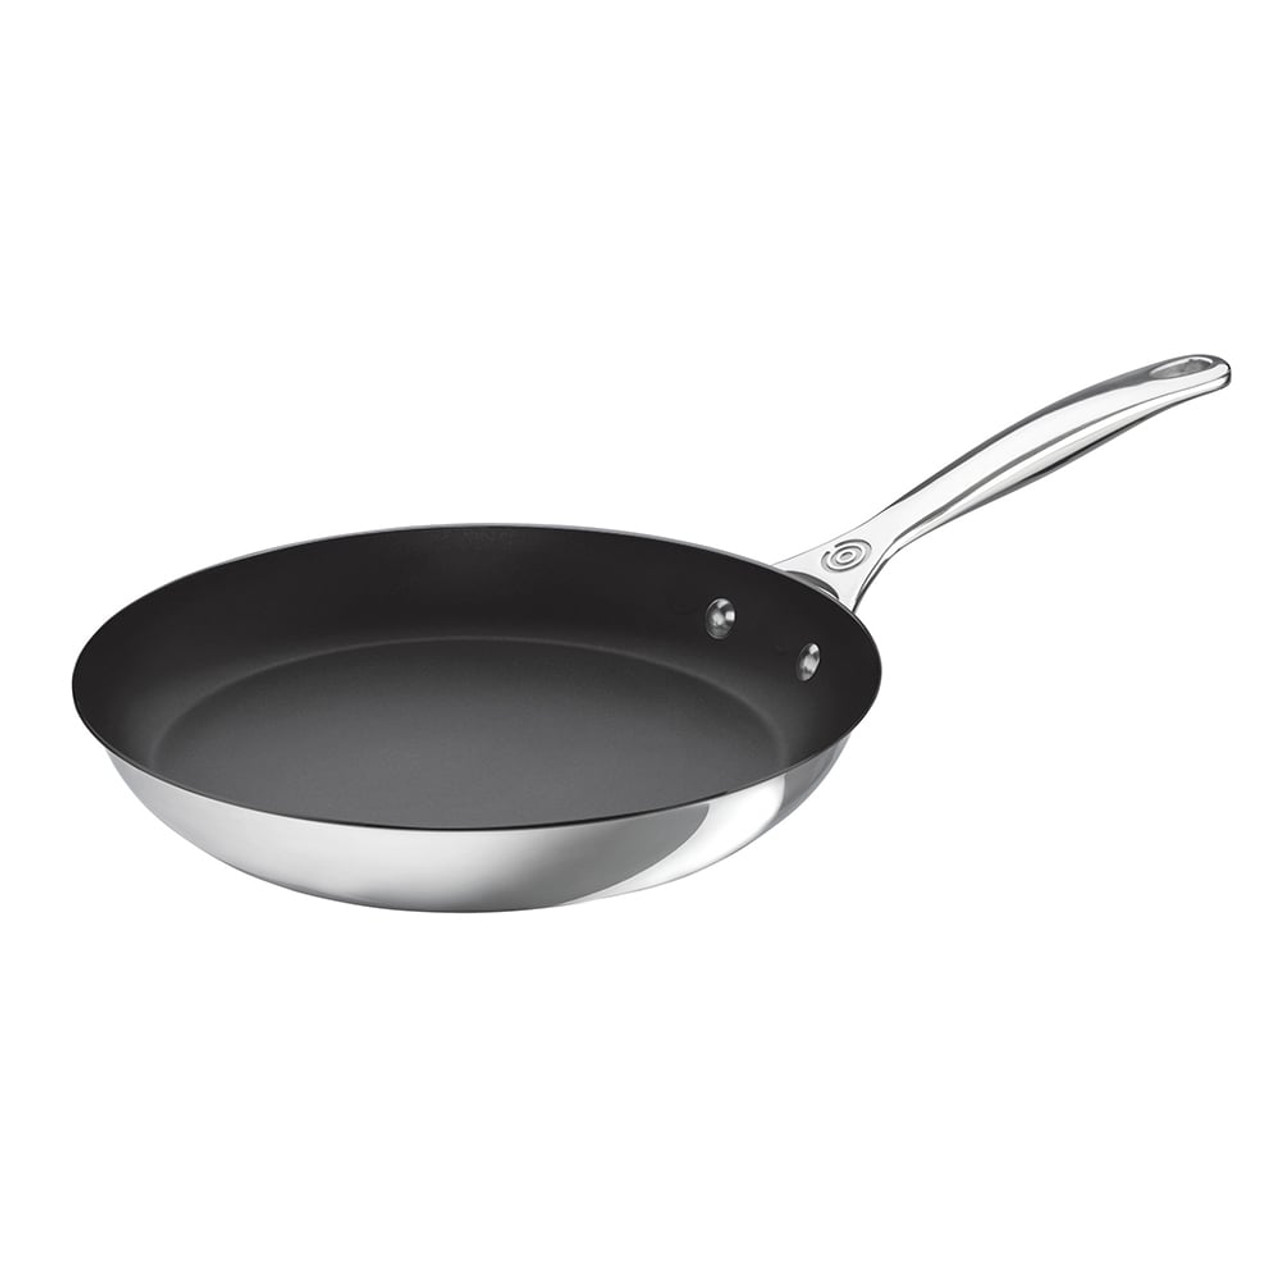 https://cdn11.bigcommerce.com/s-hccytny0od/images/stencil/1280x1280/products/3925/14289/le-creuset-stainless-steel-nonstick-fry-pan-12in__41091.1612875201.jpg?c=2?imbypass=on